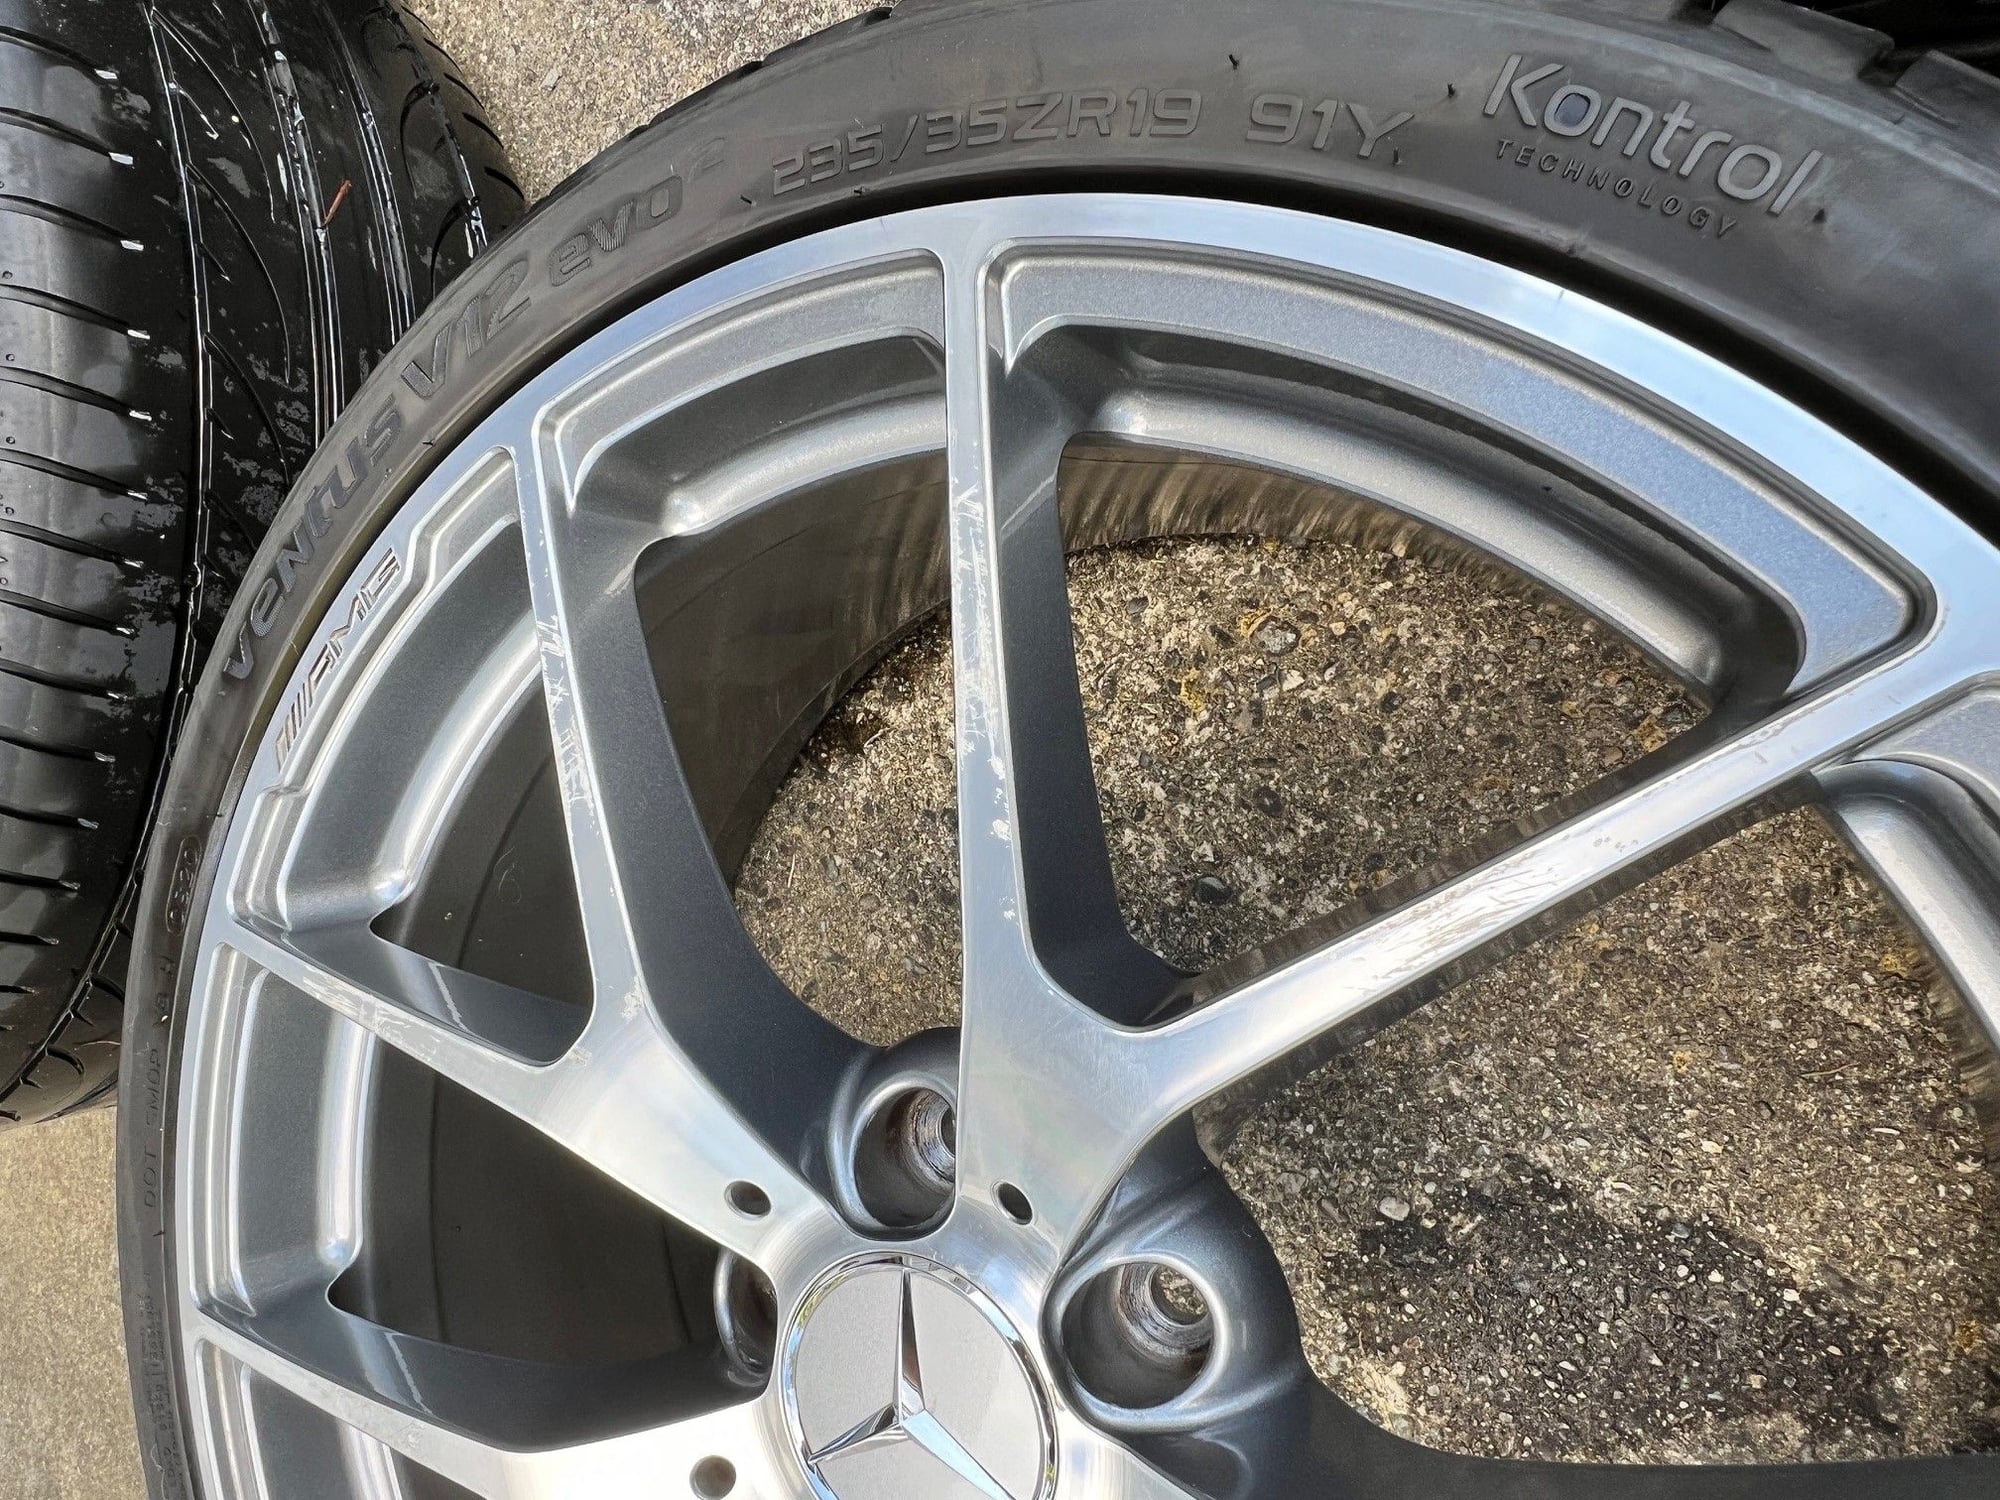 Wheels and Tires/Axles - OEM C63 AMG 507 Edition Silver Wheels - Used - 2009 to 2014 Mercedes-Benz C63 AMG - Seattle, WA 98166, United States